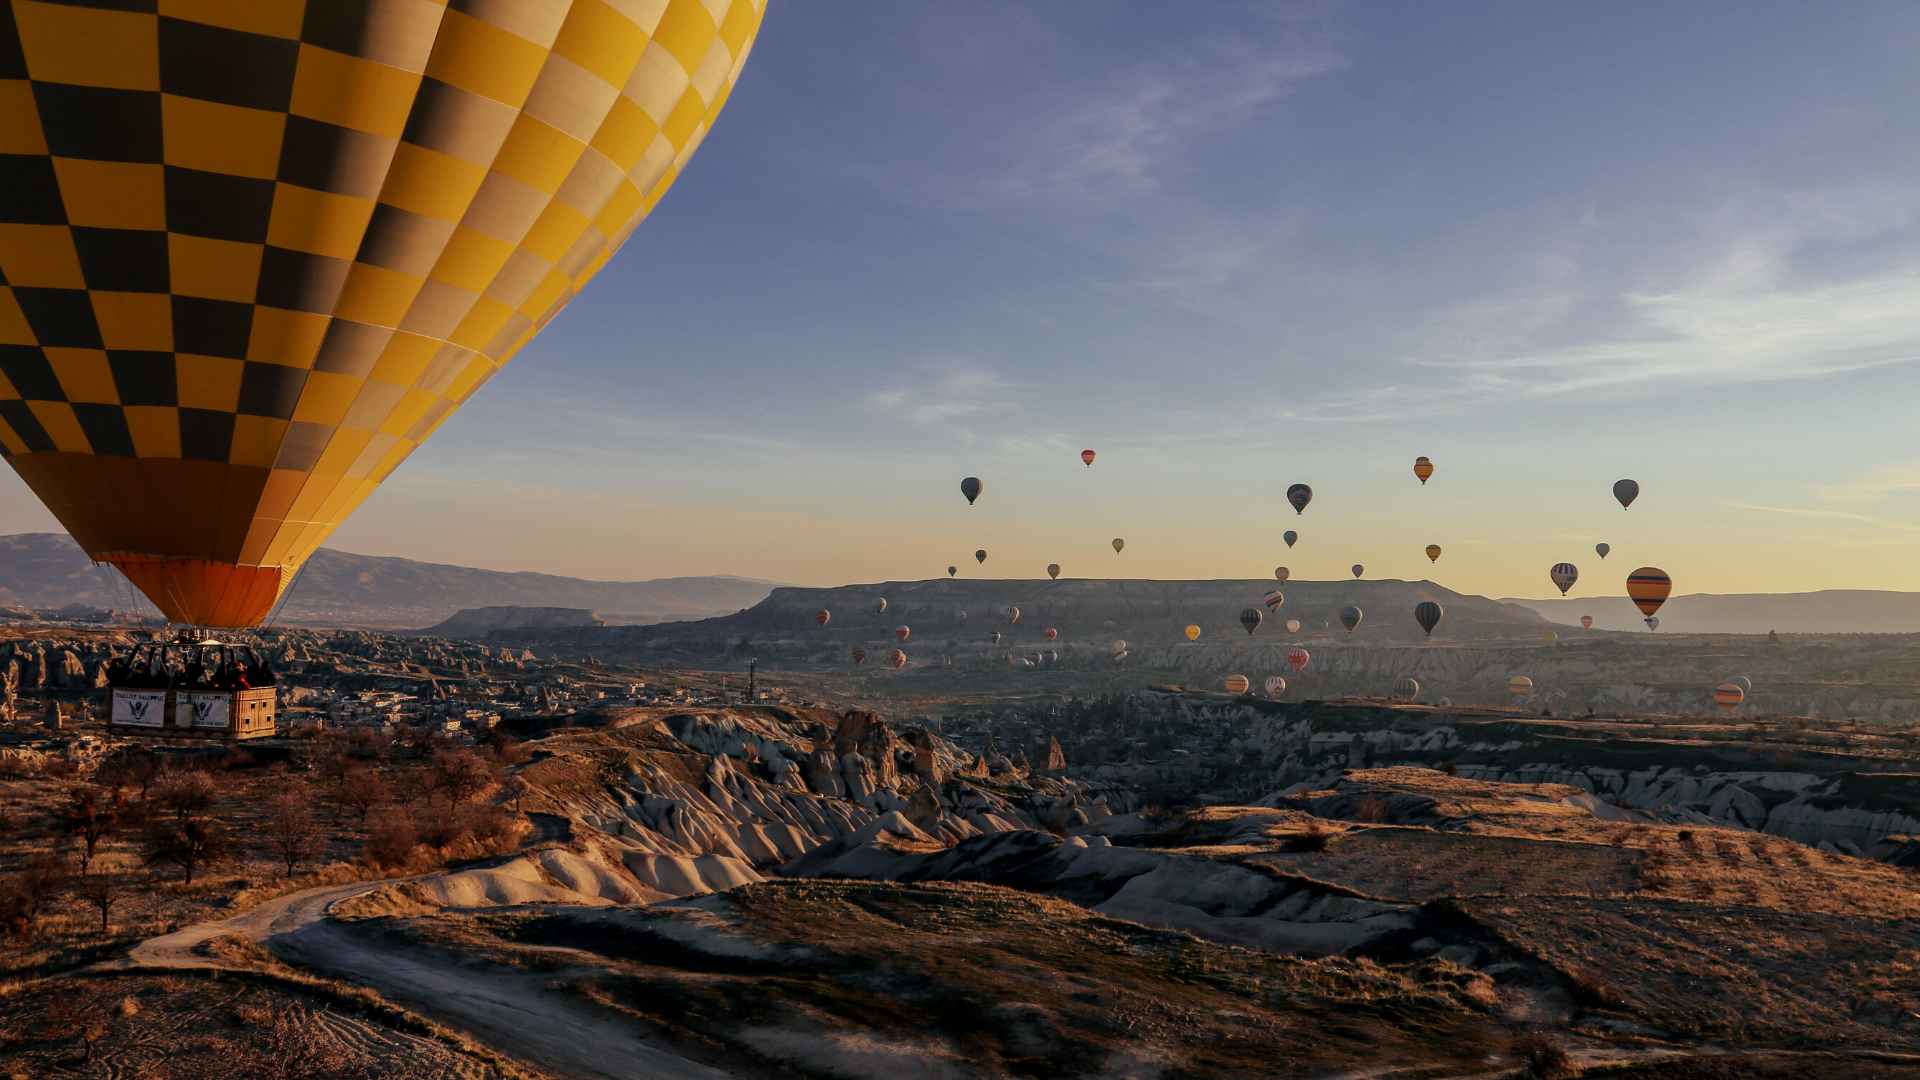 Inspiring view of a large hot air balloon in the foreground, dozens of hot air balloons in the background, floating above majestic scenery